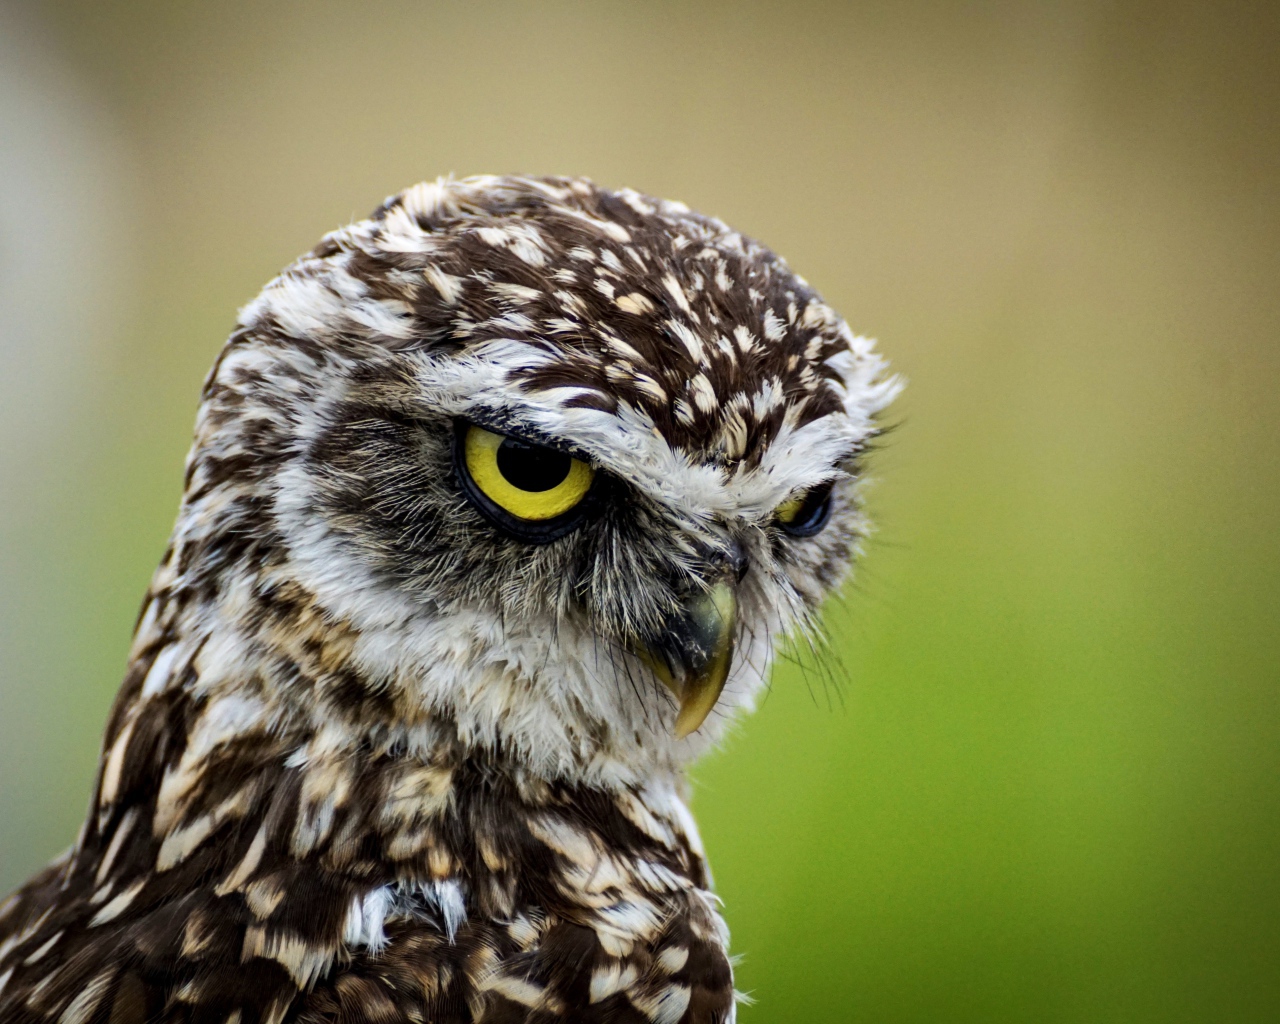 Head of a big owl with yellow eyes close-up